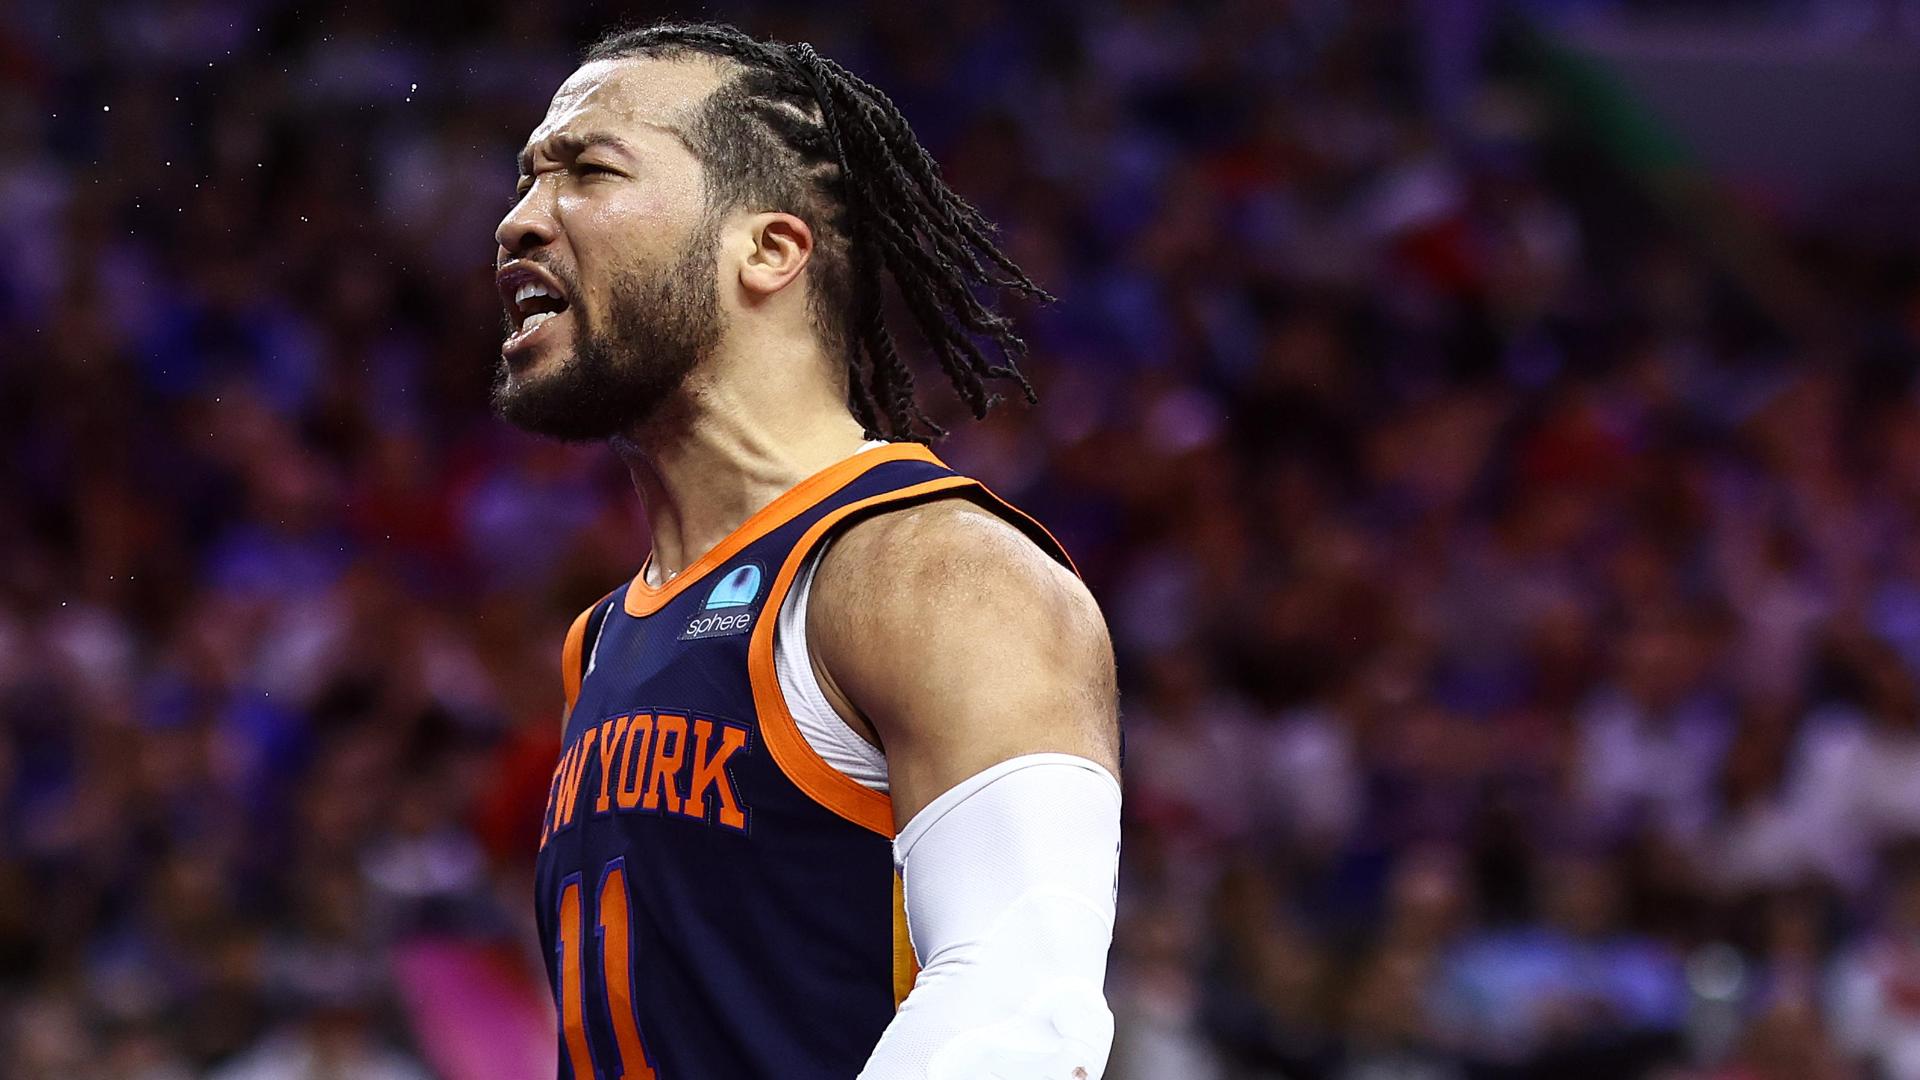 Jalen Brunson drops Knicks playoff-record 47 points in Game 4 win